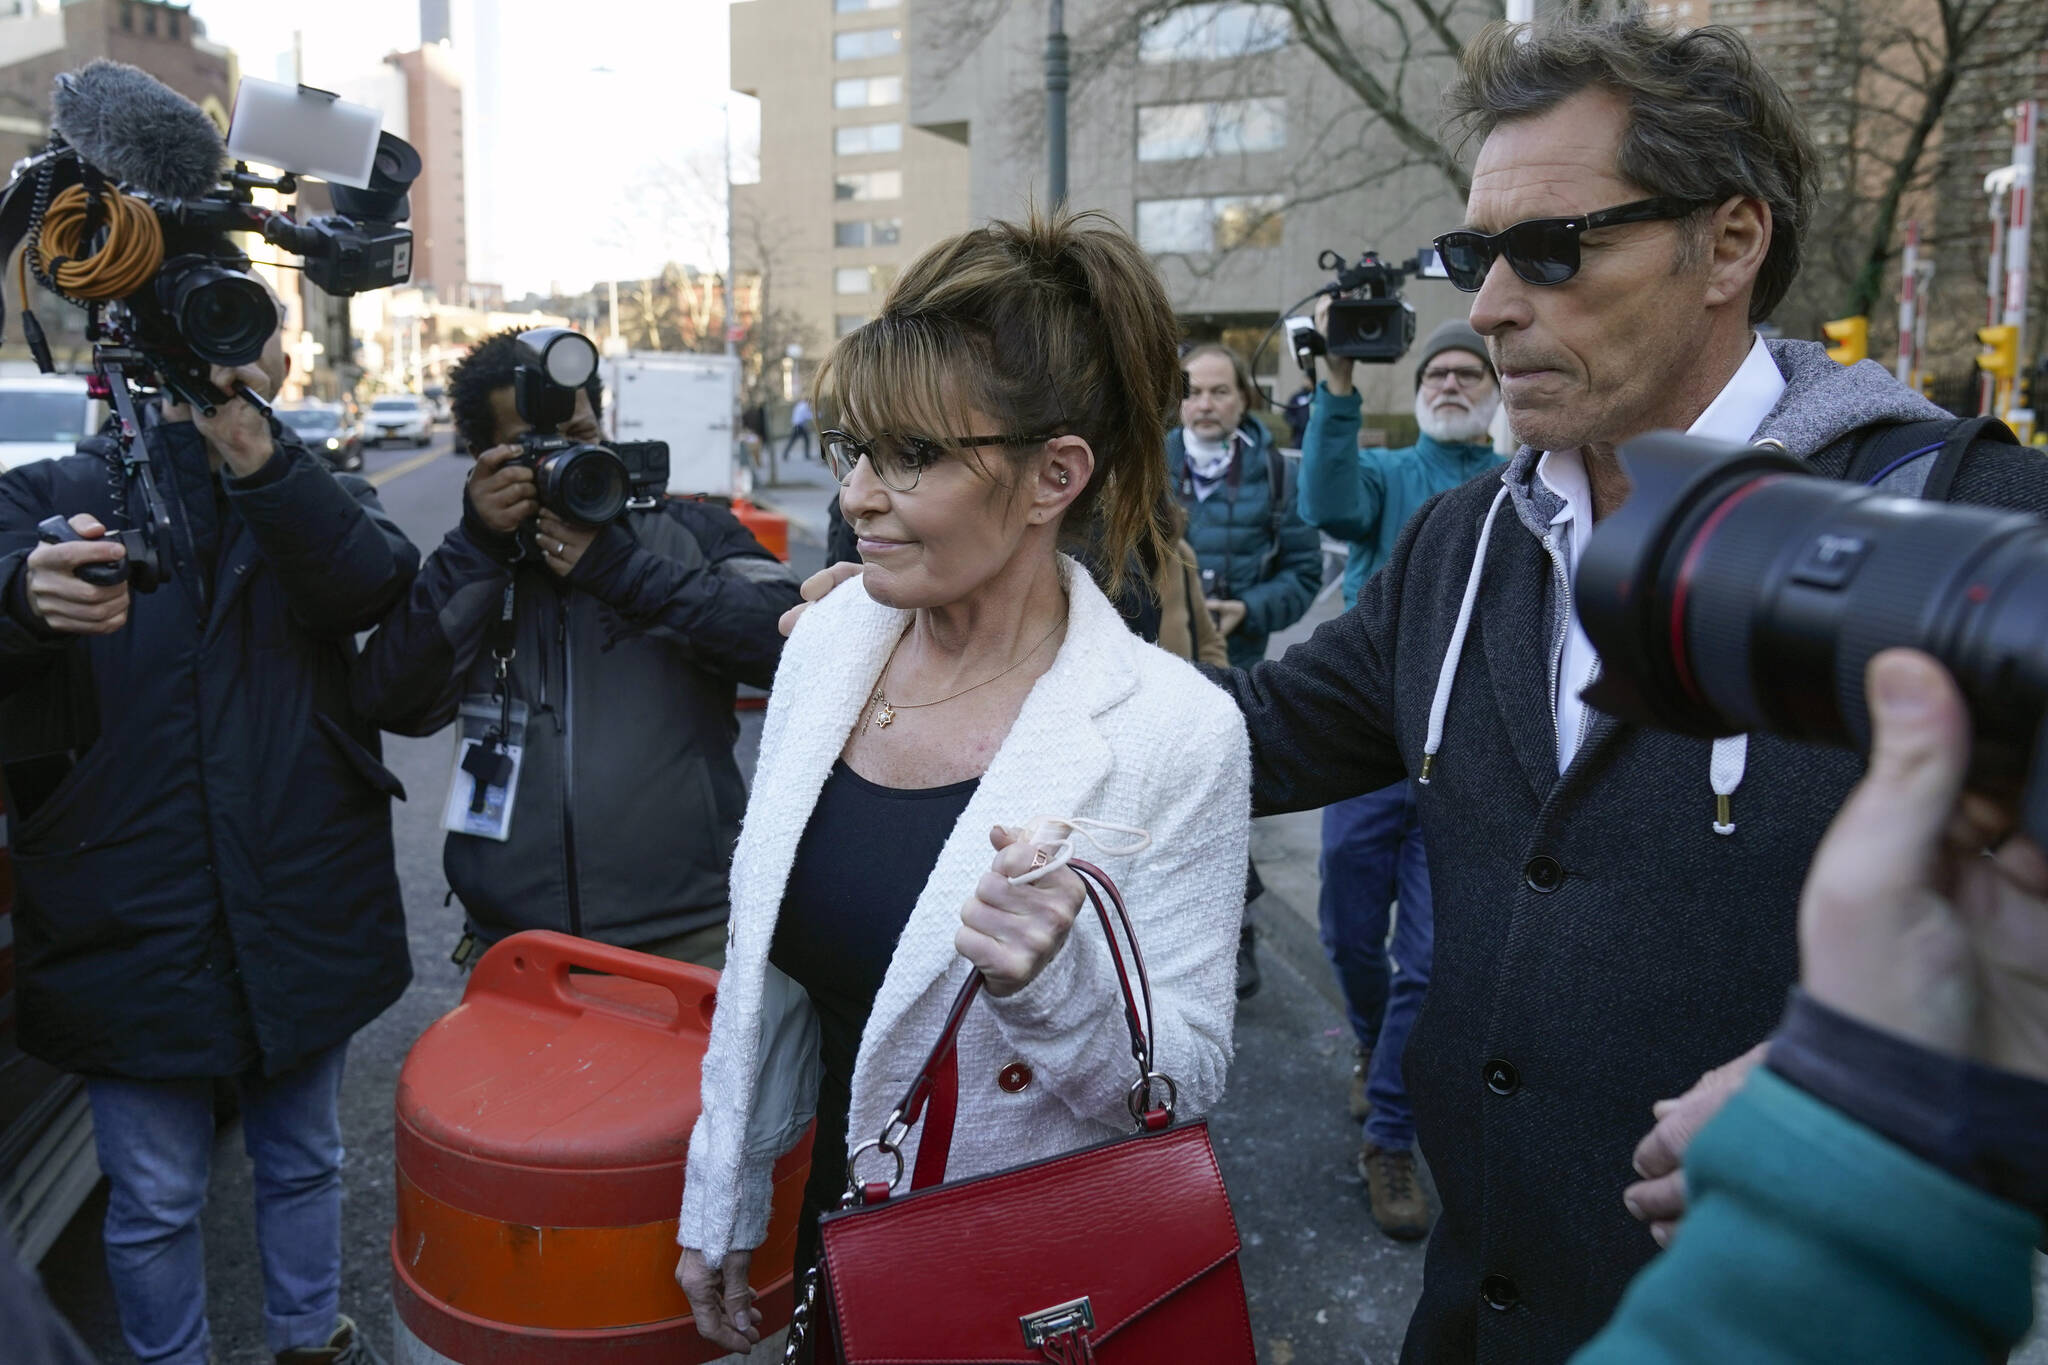 Sarah Palin is escorted to her car by Ron Duguay after leaving the courthouse in New York, Thursday, Feb. 10, 2022. Former Alaska Gov. Sarah Palin told a jury Thursday she felt like she was at the mercy of a “Goliath” when she first learned a 2017 New York Times editorial suggested her campaign rhetoric helped incite a mass shooting. (AP Photo/Seth Wenig)